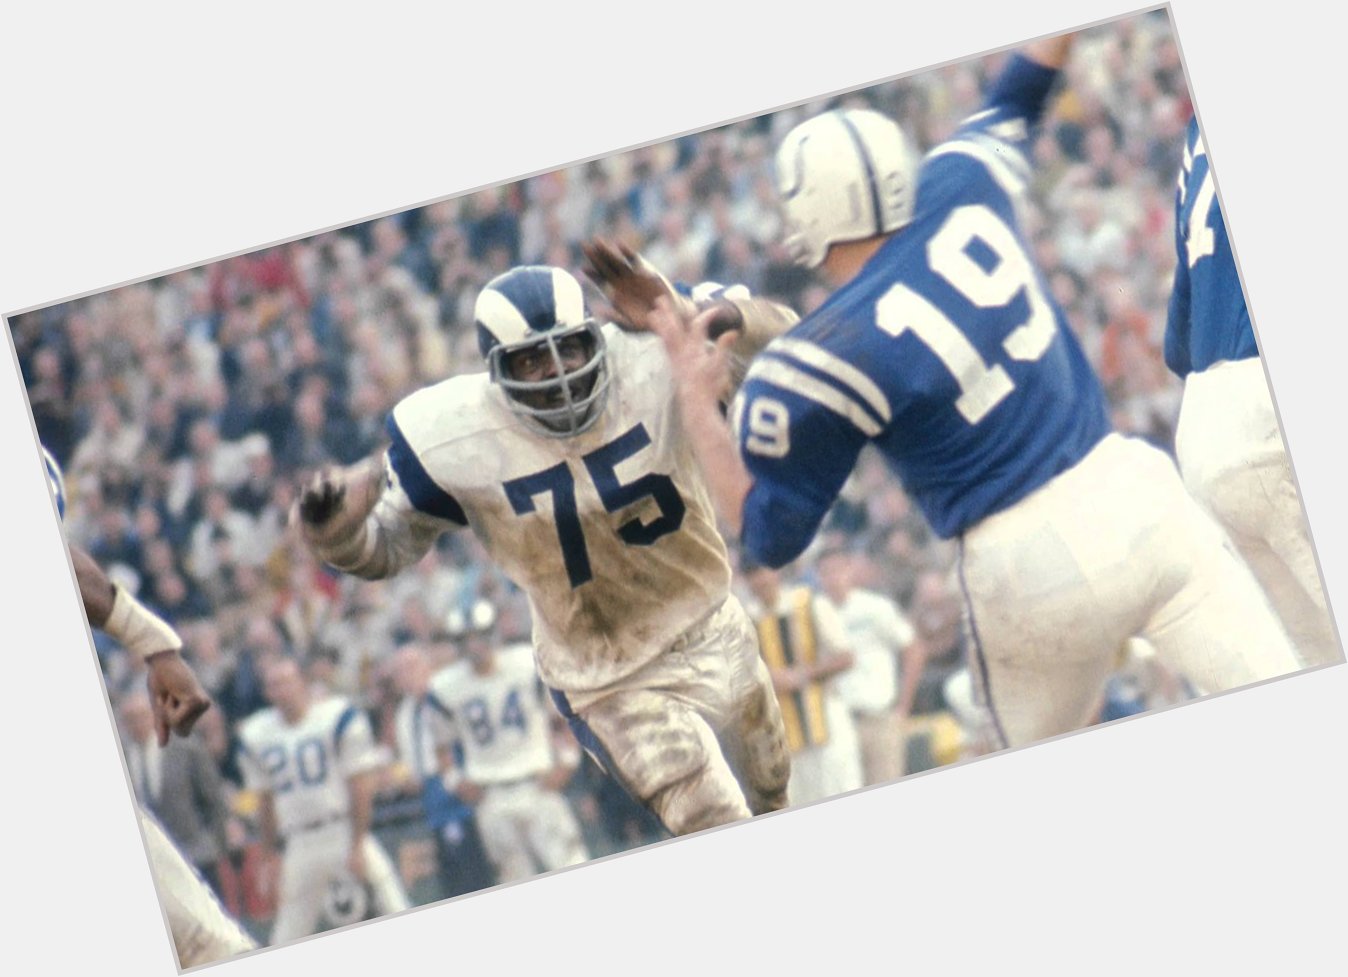 Happy Birthday to Deacon Jones(75), who would have turned 79 today! 